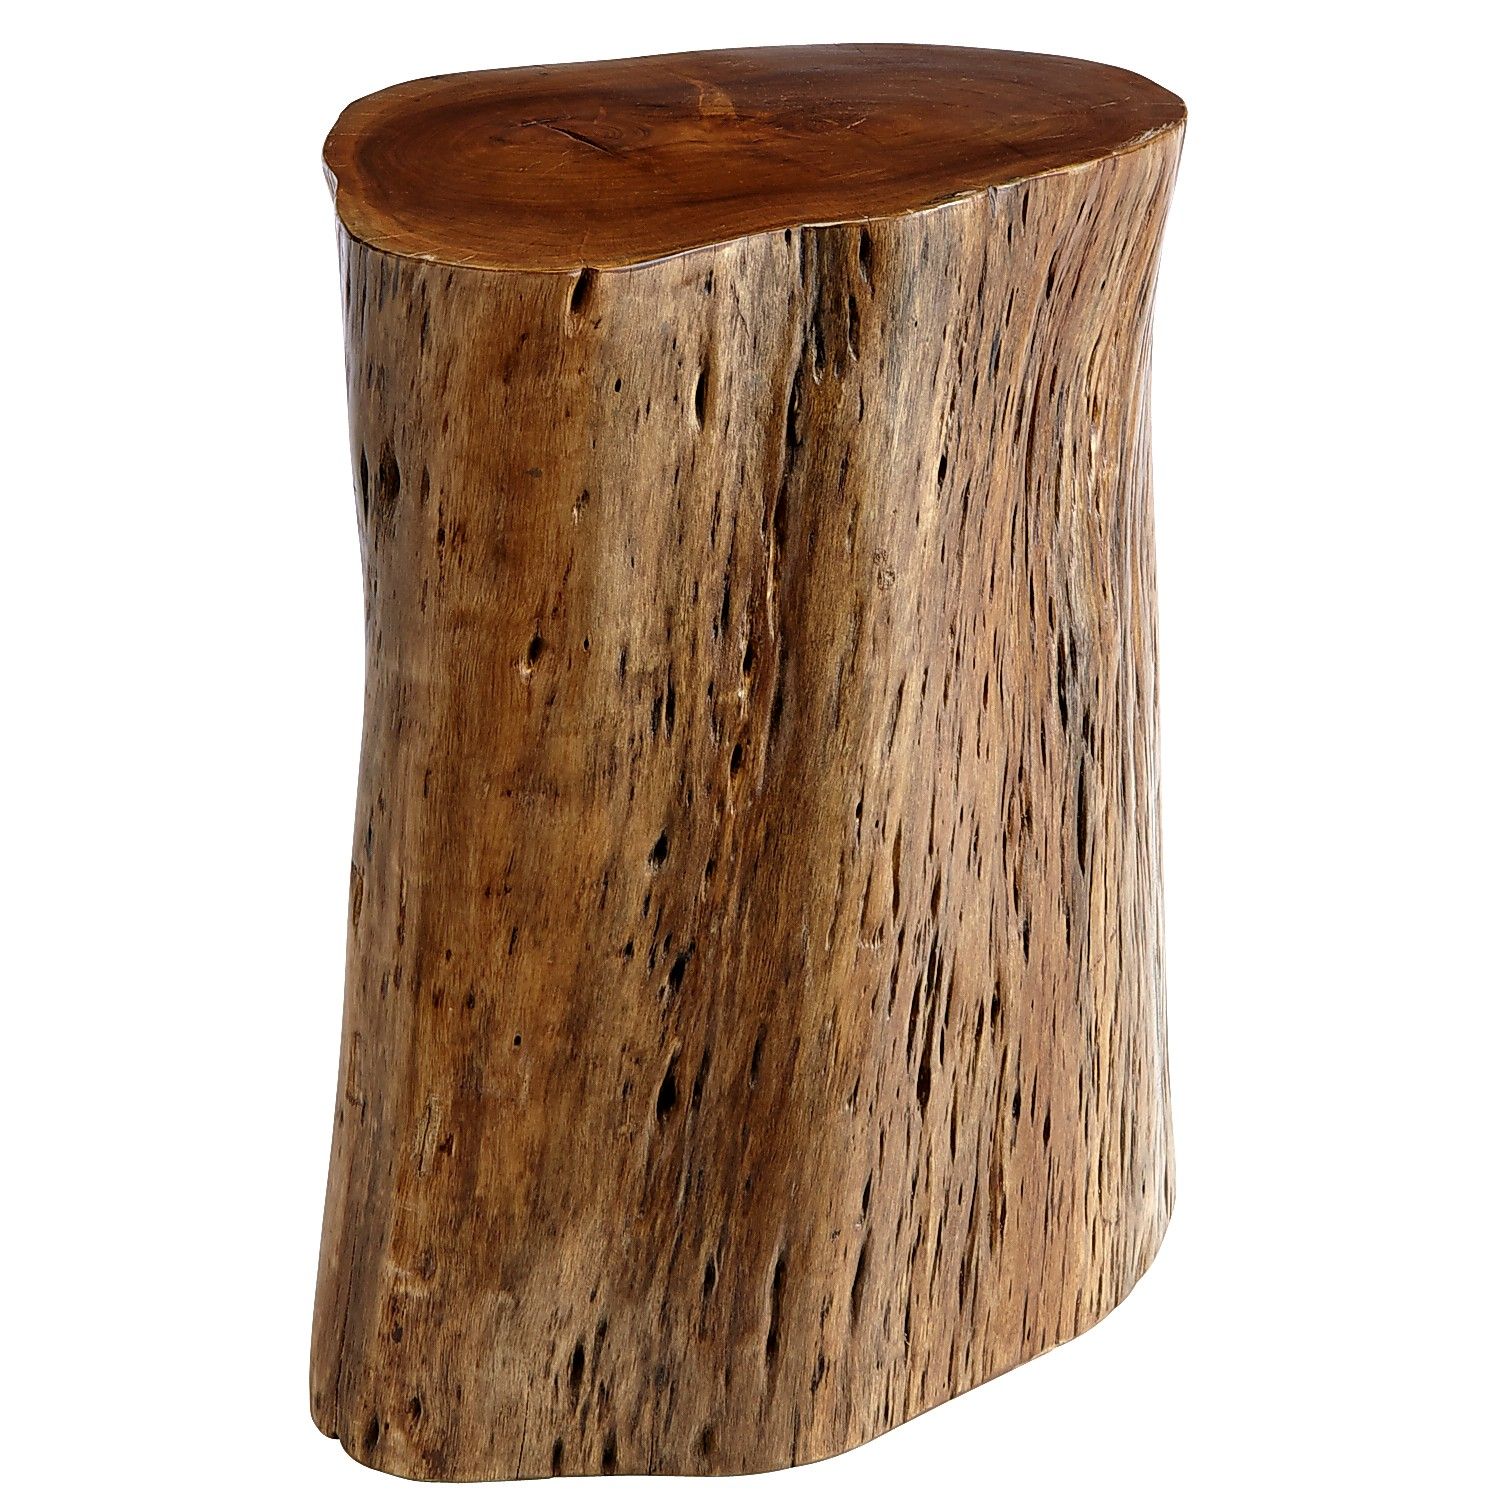 maram natural tree stump accent table wood tables dining room chairs edmonton ceiling lamp shades black cube end mosaic patio west elm industrial storage cabinet cream colored